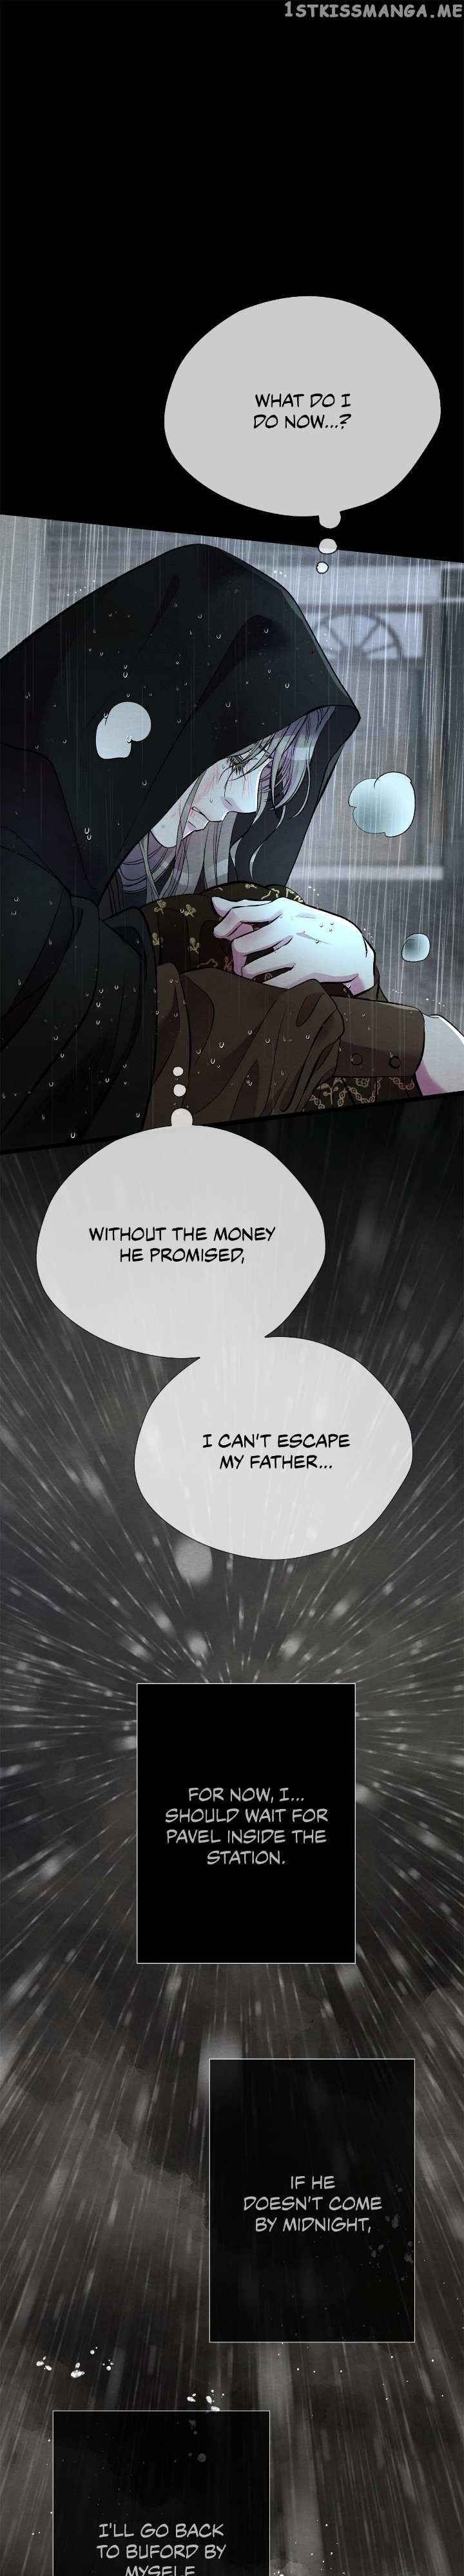 The Problematic Prince - Page 4